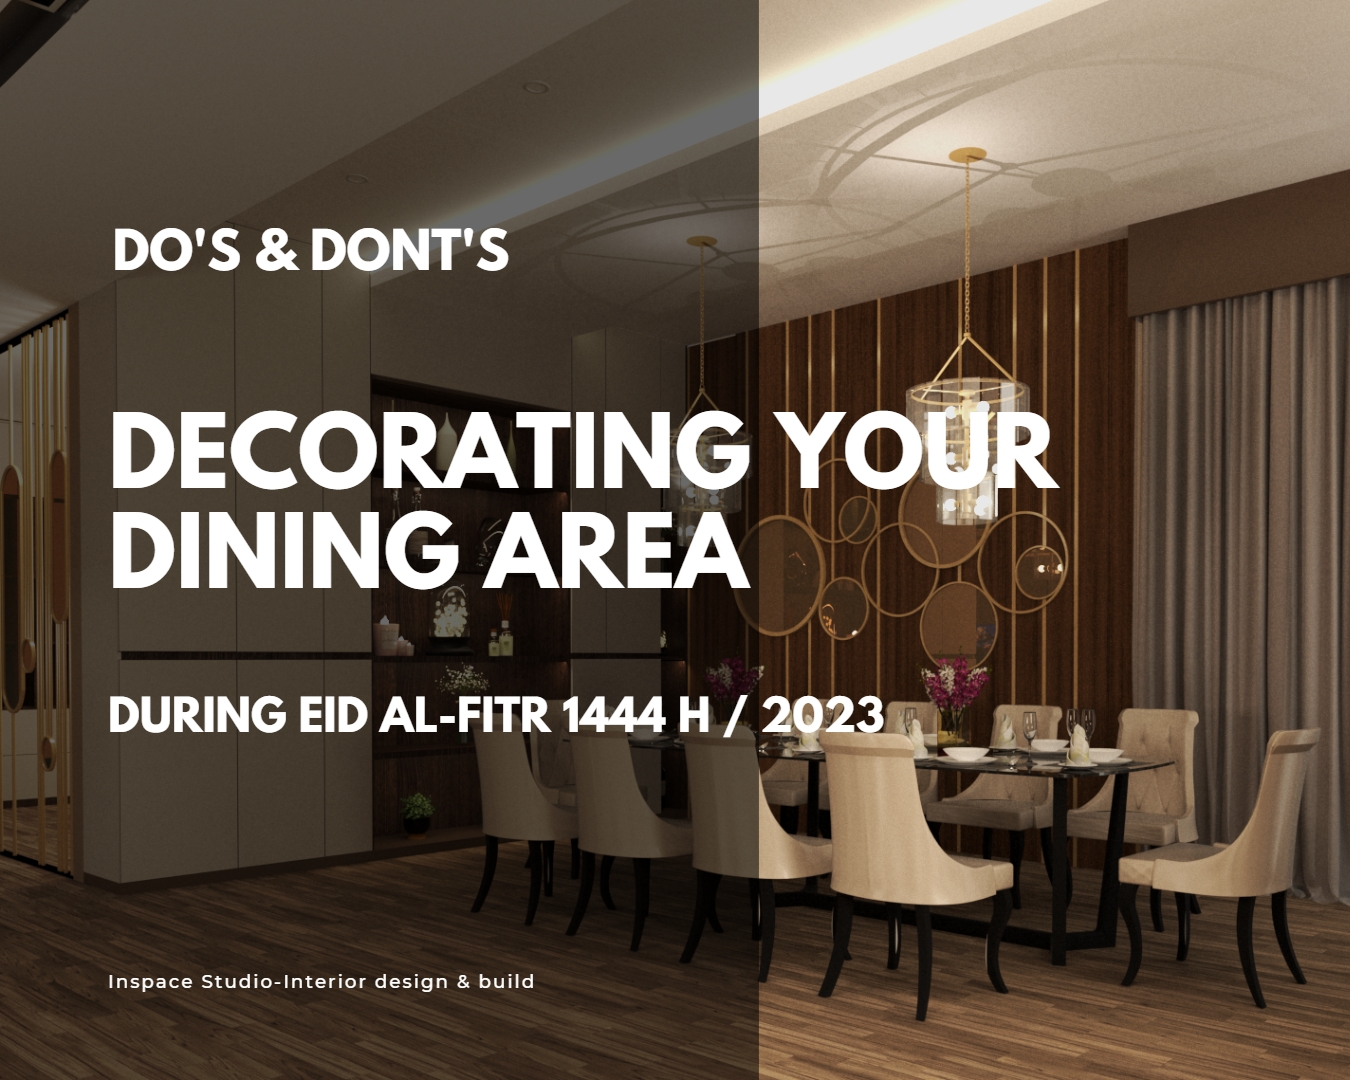 Do’s and Dont’s while decorating your Dining area for EID occasion.